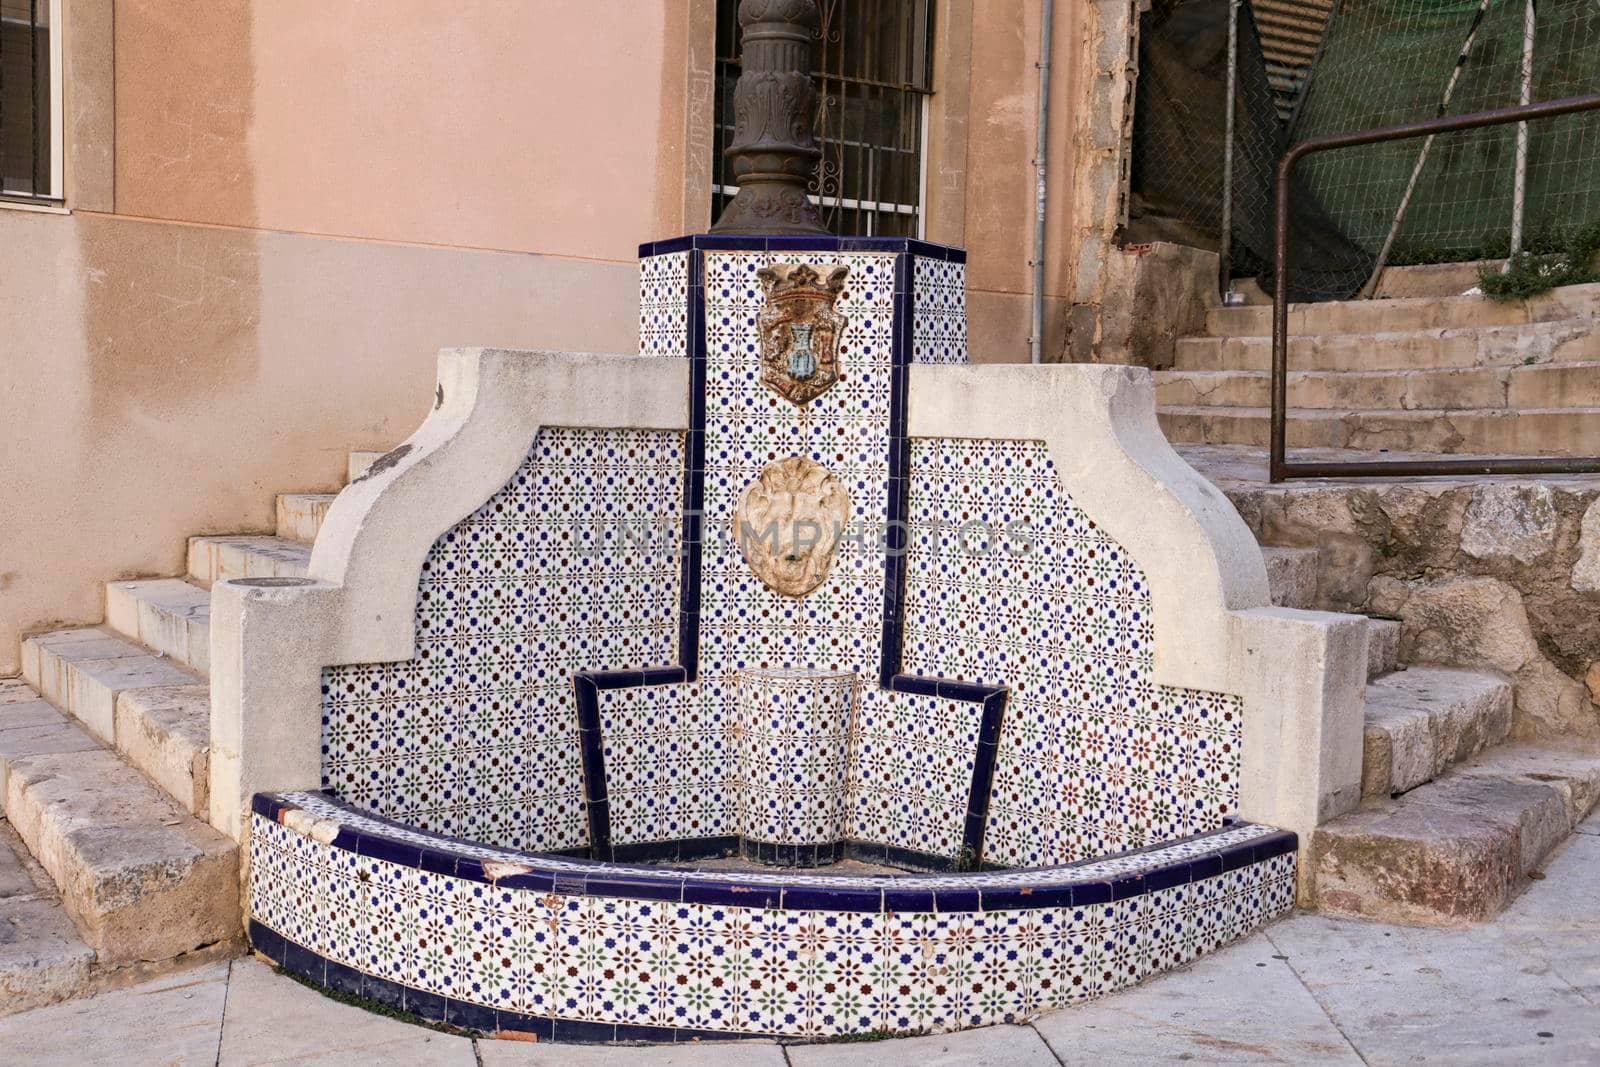 Fountain made of tiles and stone in Cartagena by soniabonet